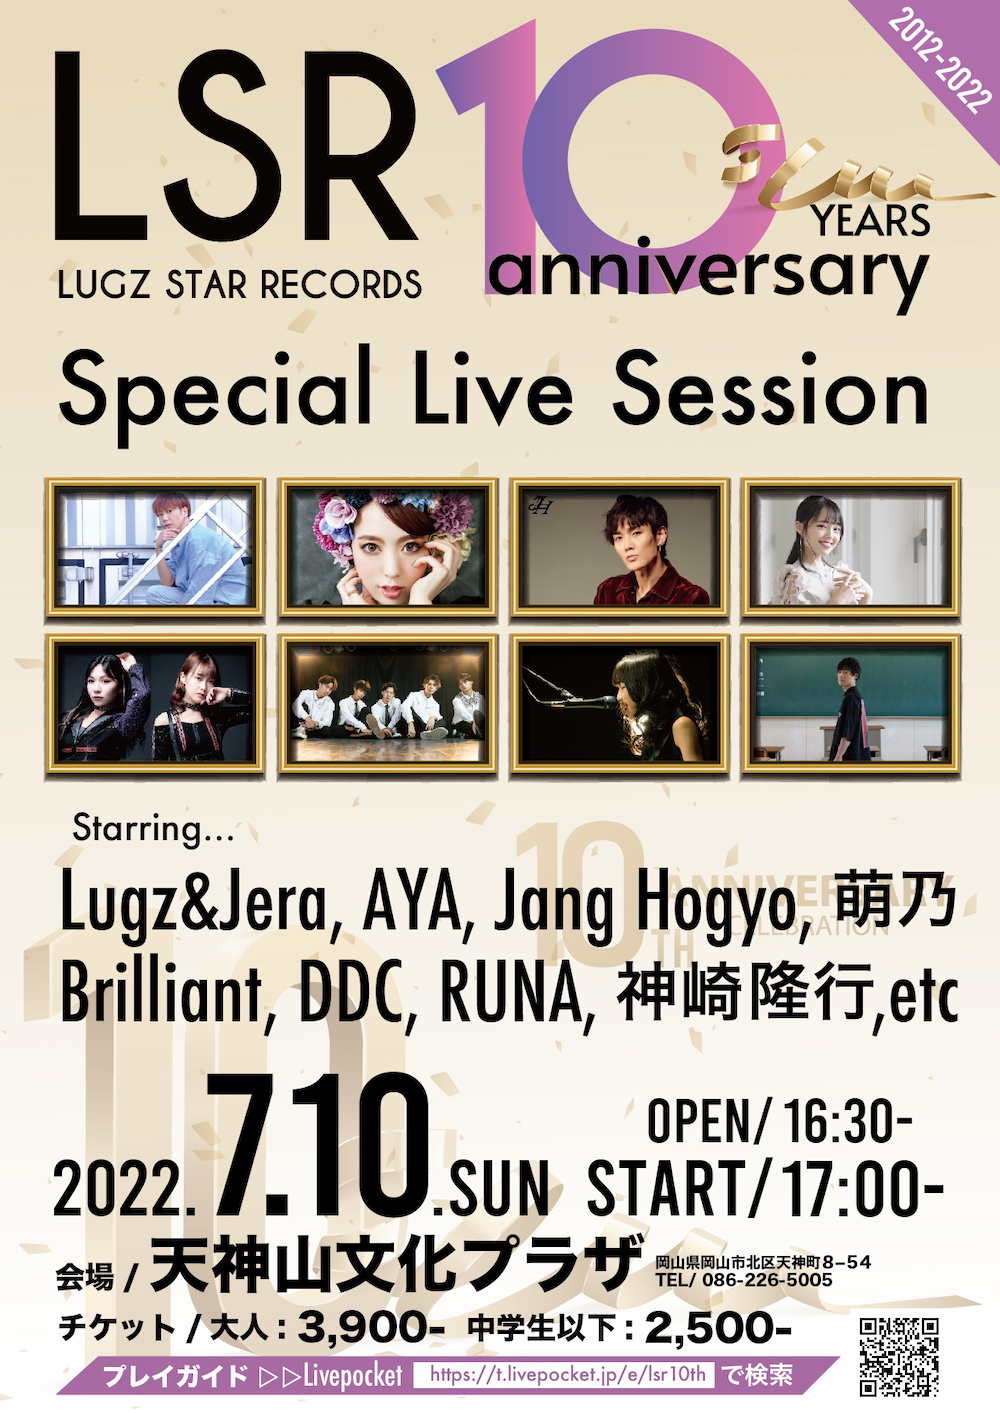 LUGZ STAR RECORDS presents... LSR 10th Anniversary Special Live Session